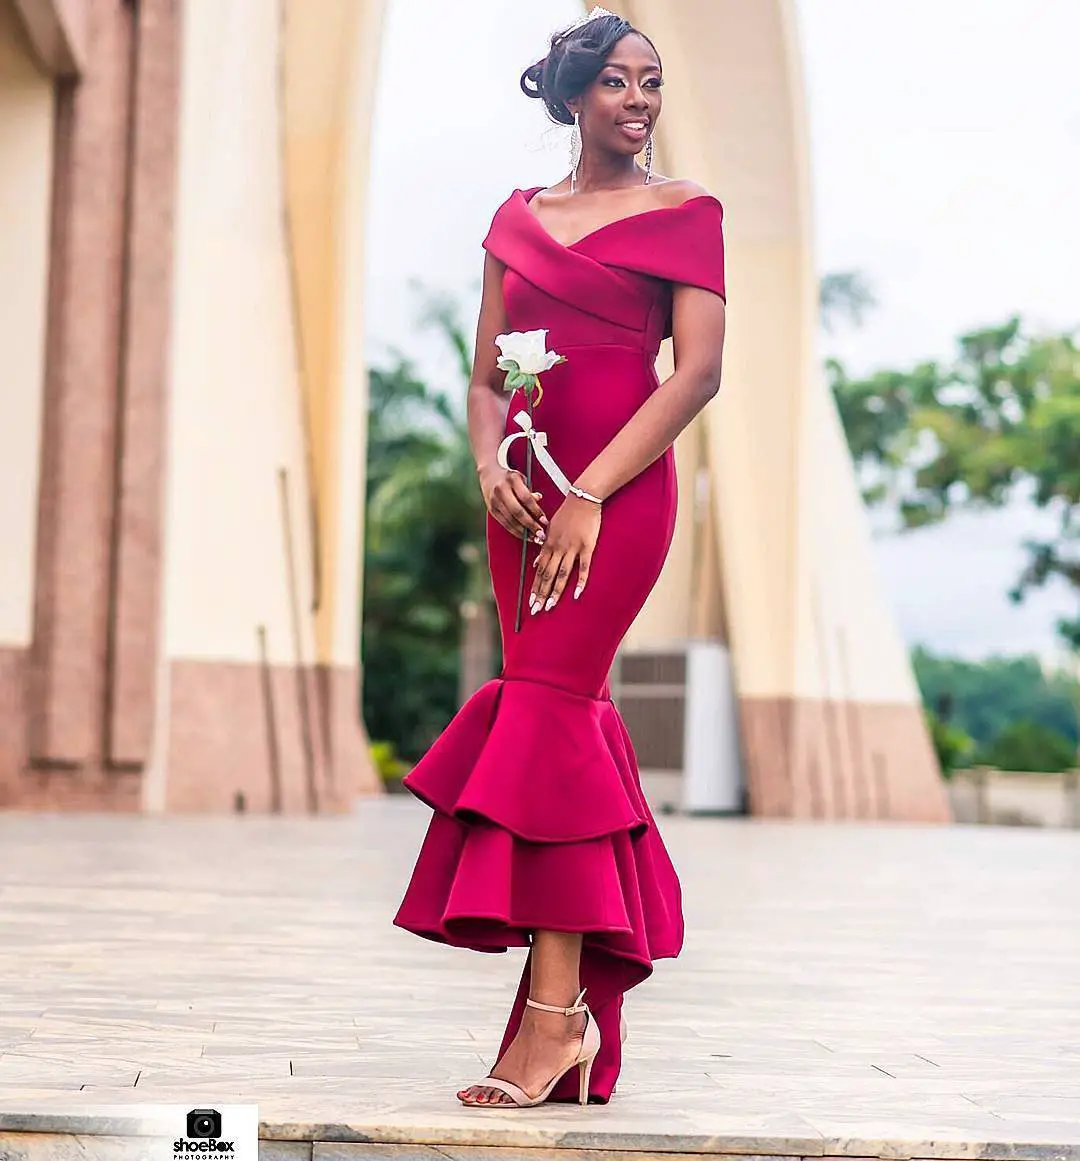 Styles For Your Bridesmaids? Check Out These Unique Bridesmaids Outfits For Some Ideas